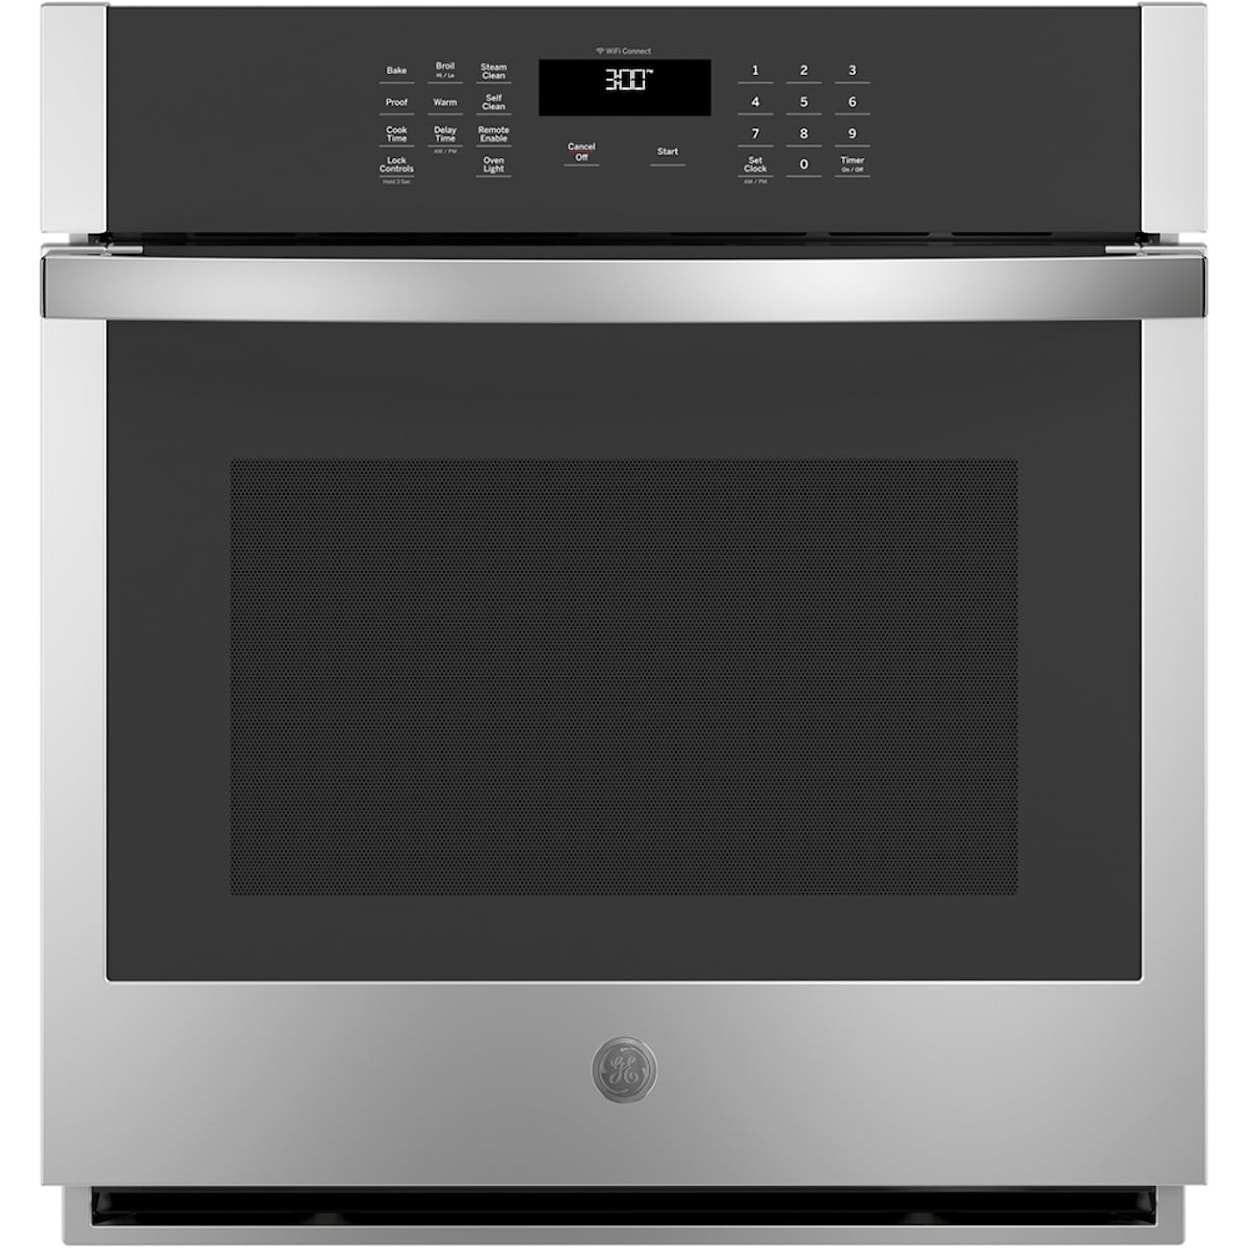 GE Appliances Wall Ovens Built-In Single Wall Oven Stainless Steel